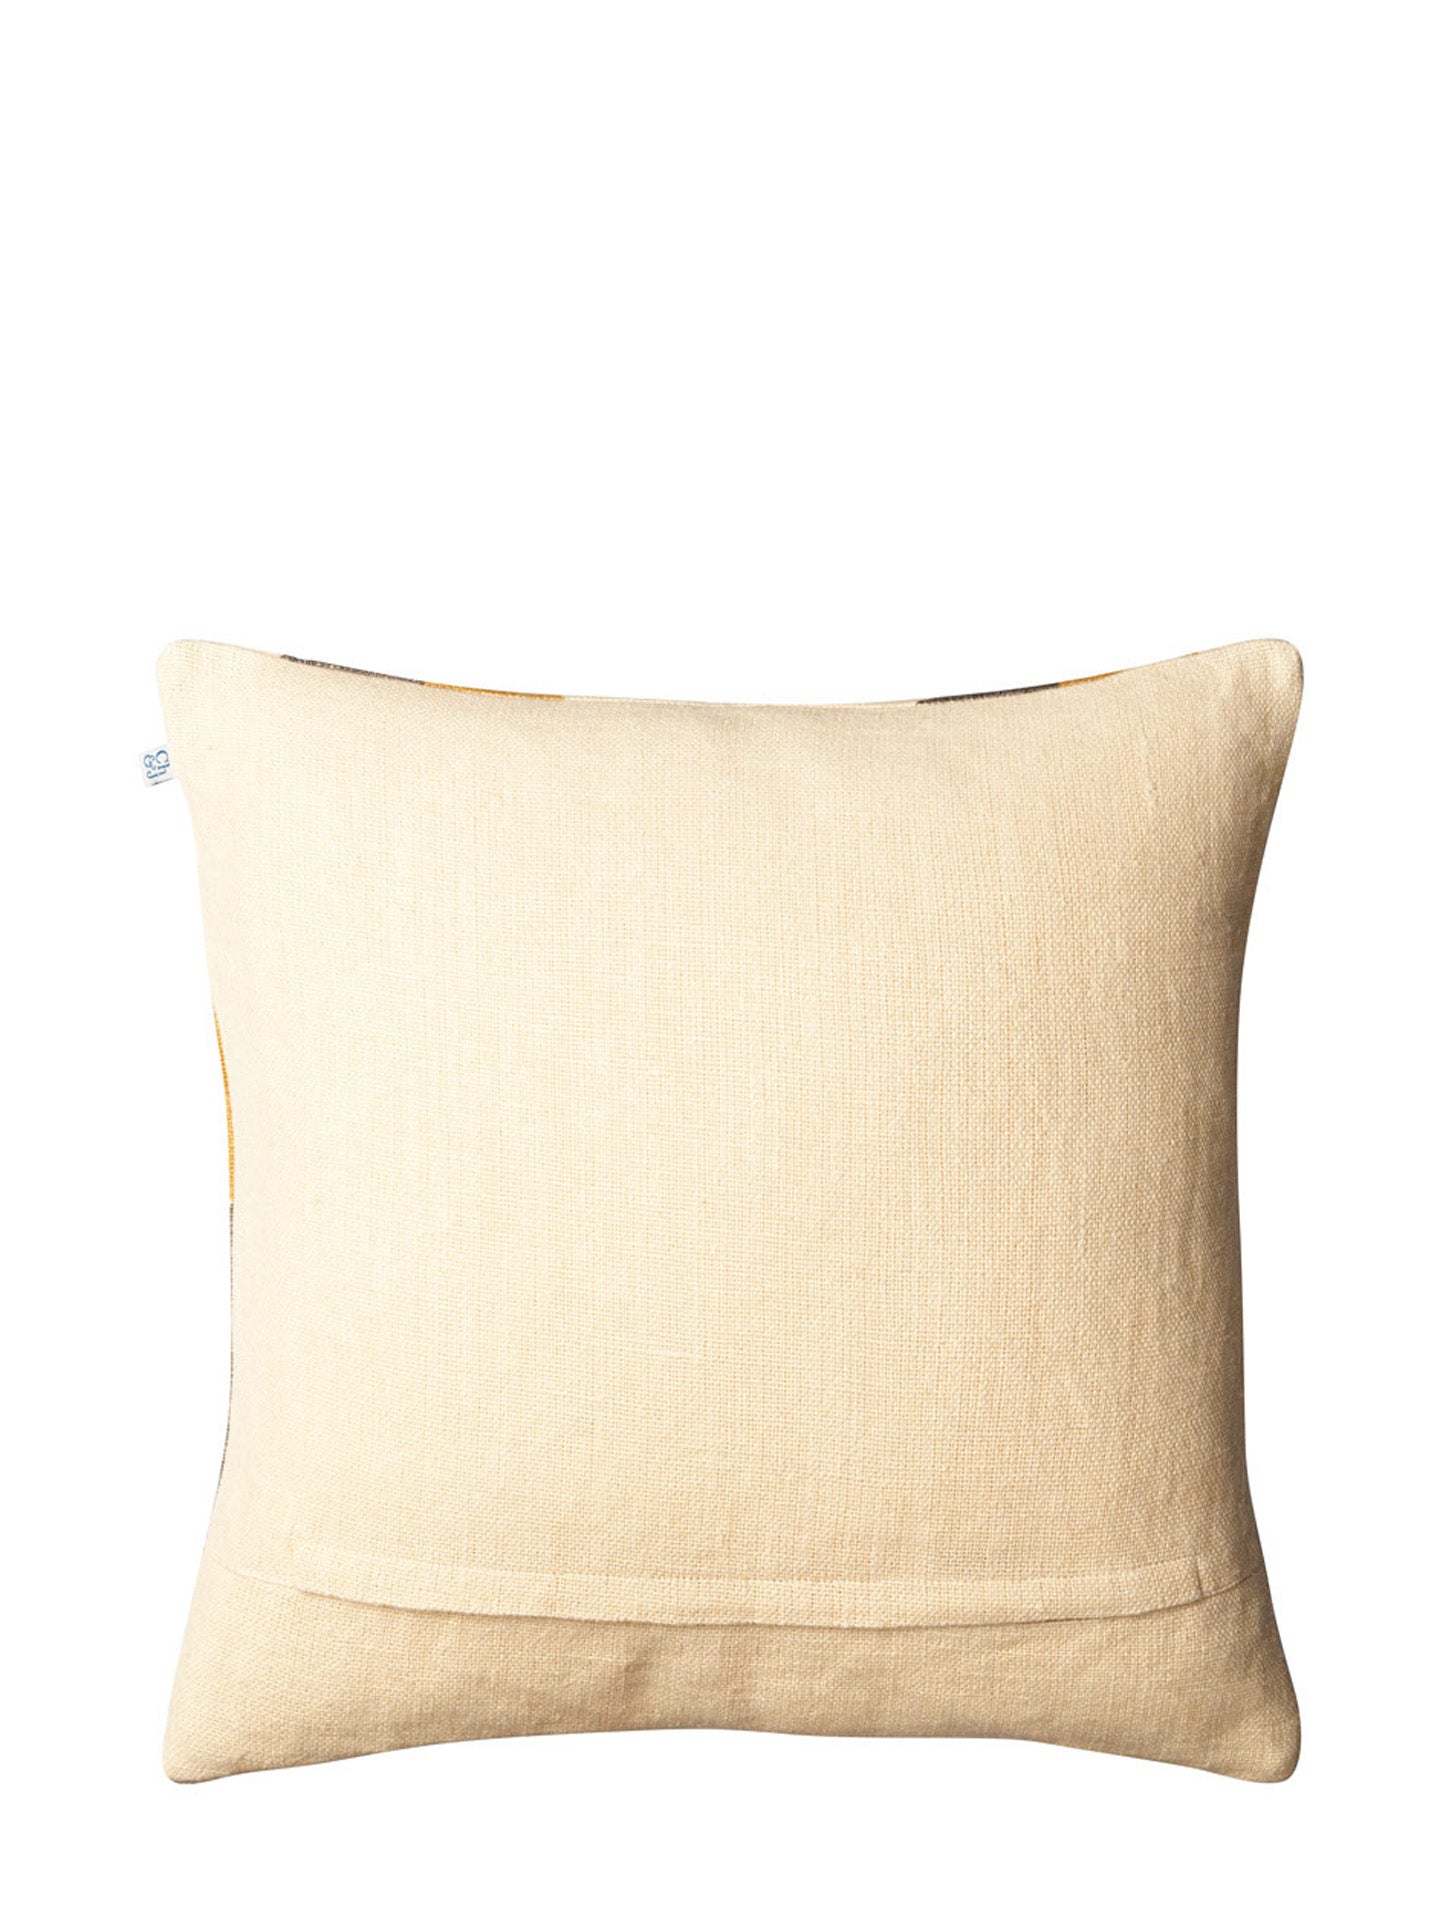 Gujarat Cushion Cover, Apricot/Taupe/Light Beige